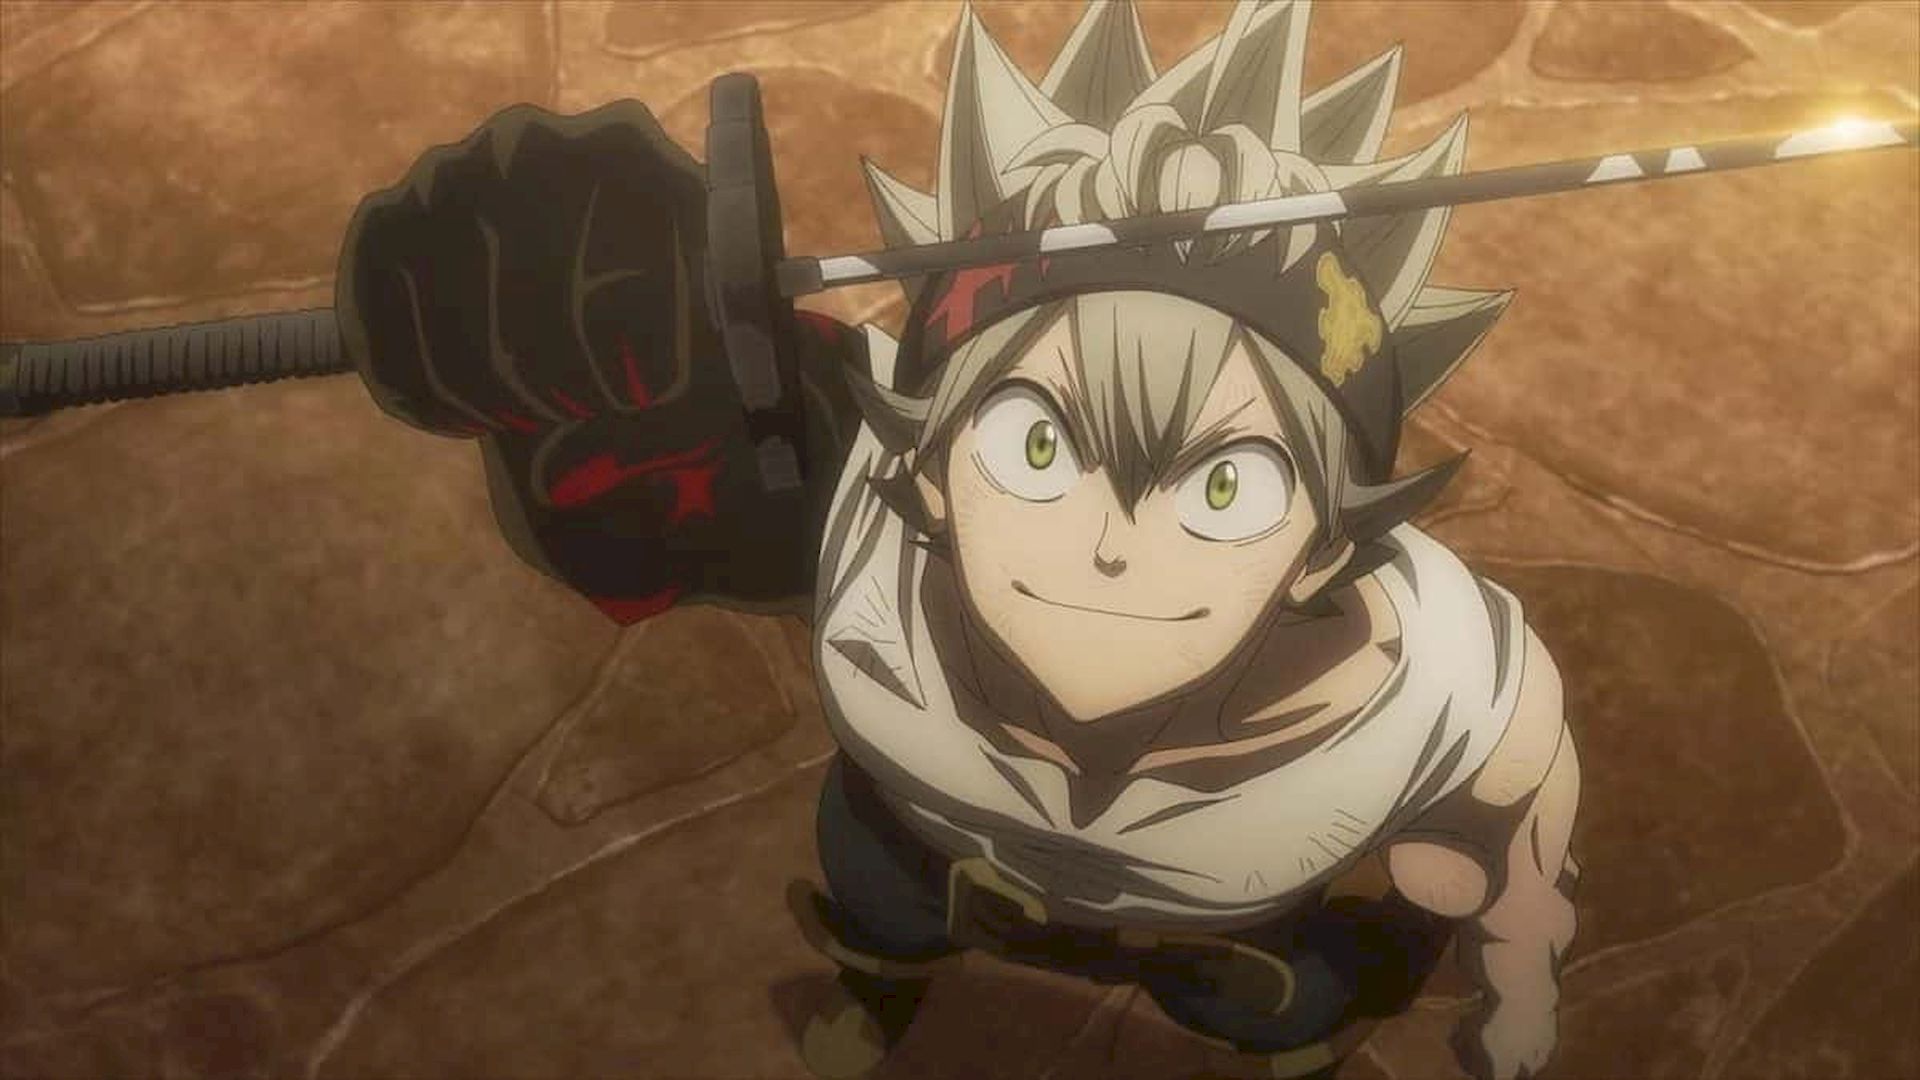 Explained: Black Clover Season 5 release date and more